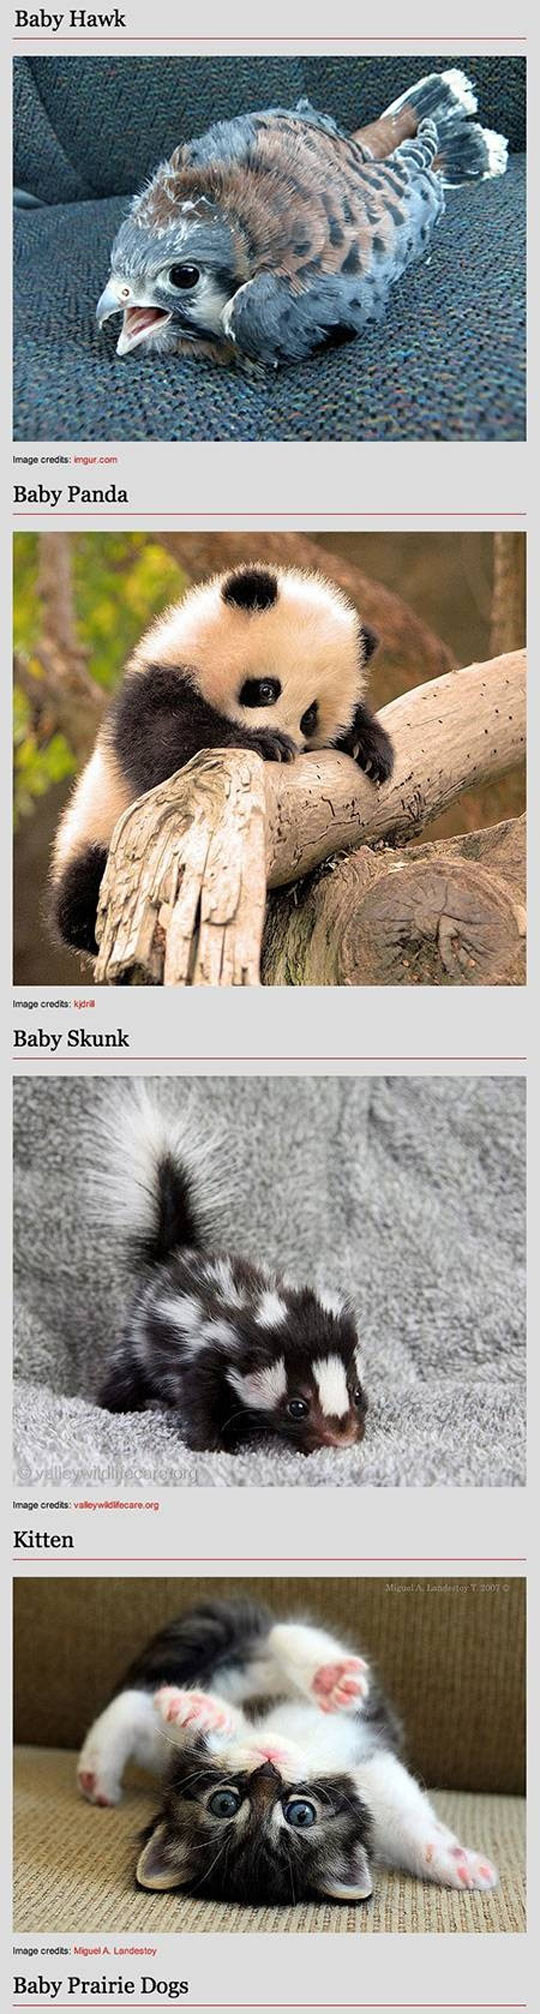 Baby animals can